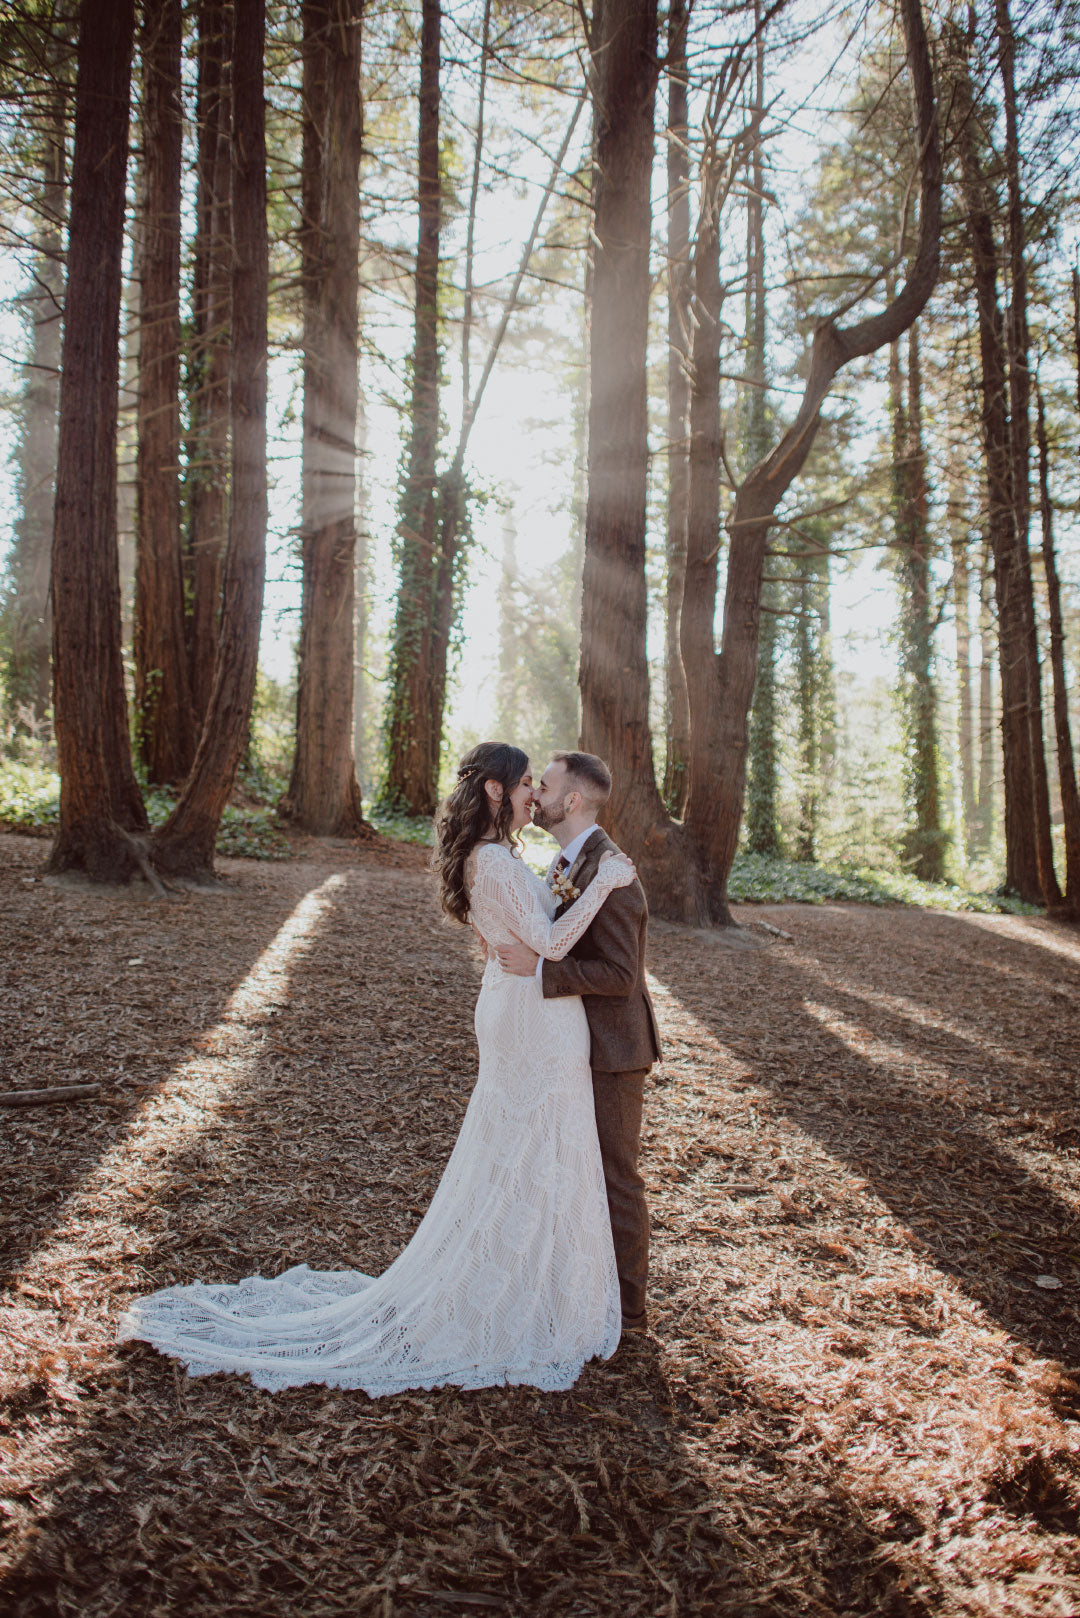 Bride and Groom in forrest with sunbeams streaming through trees